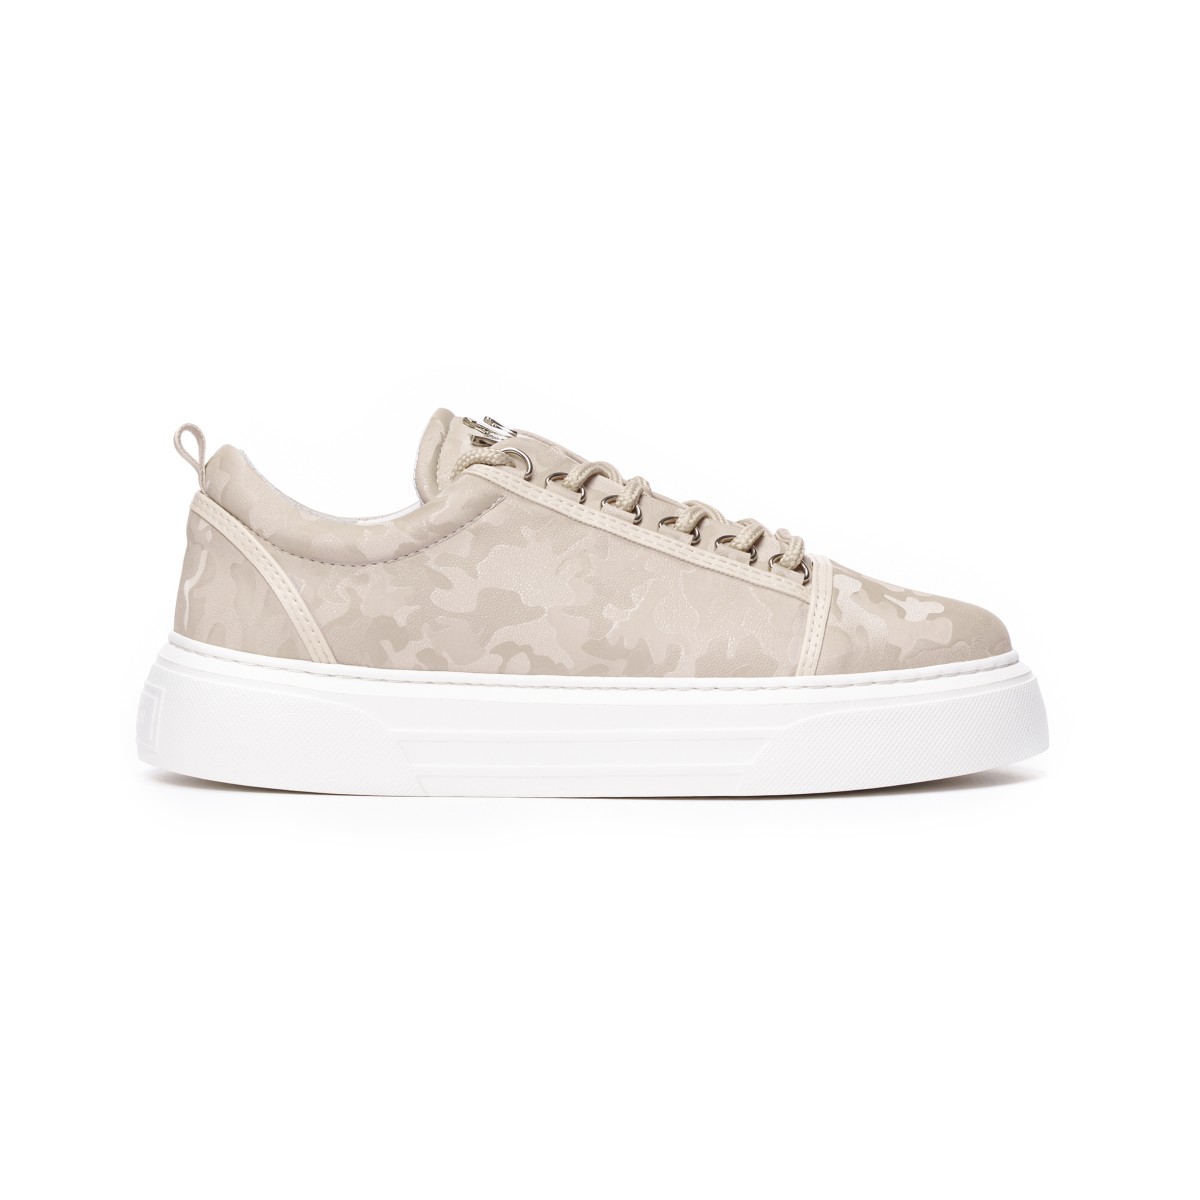 Men's Low Top Sneakers Crowned Shoes Camo Creme - Cream